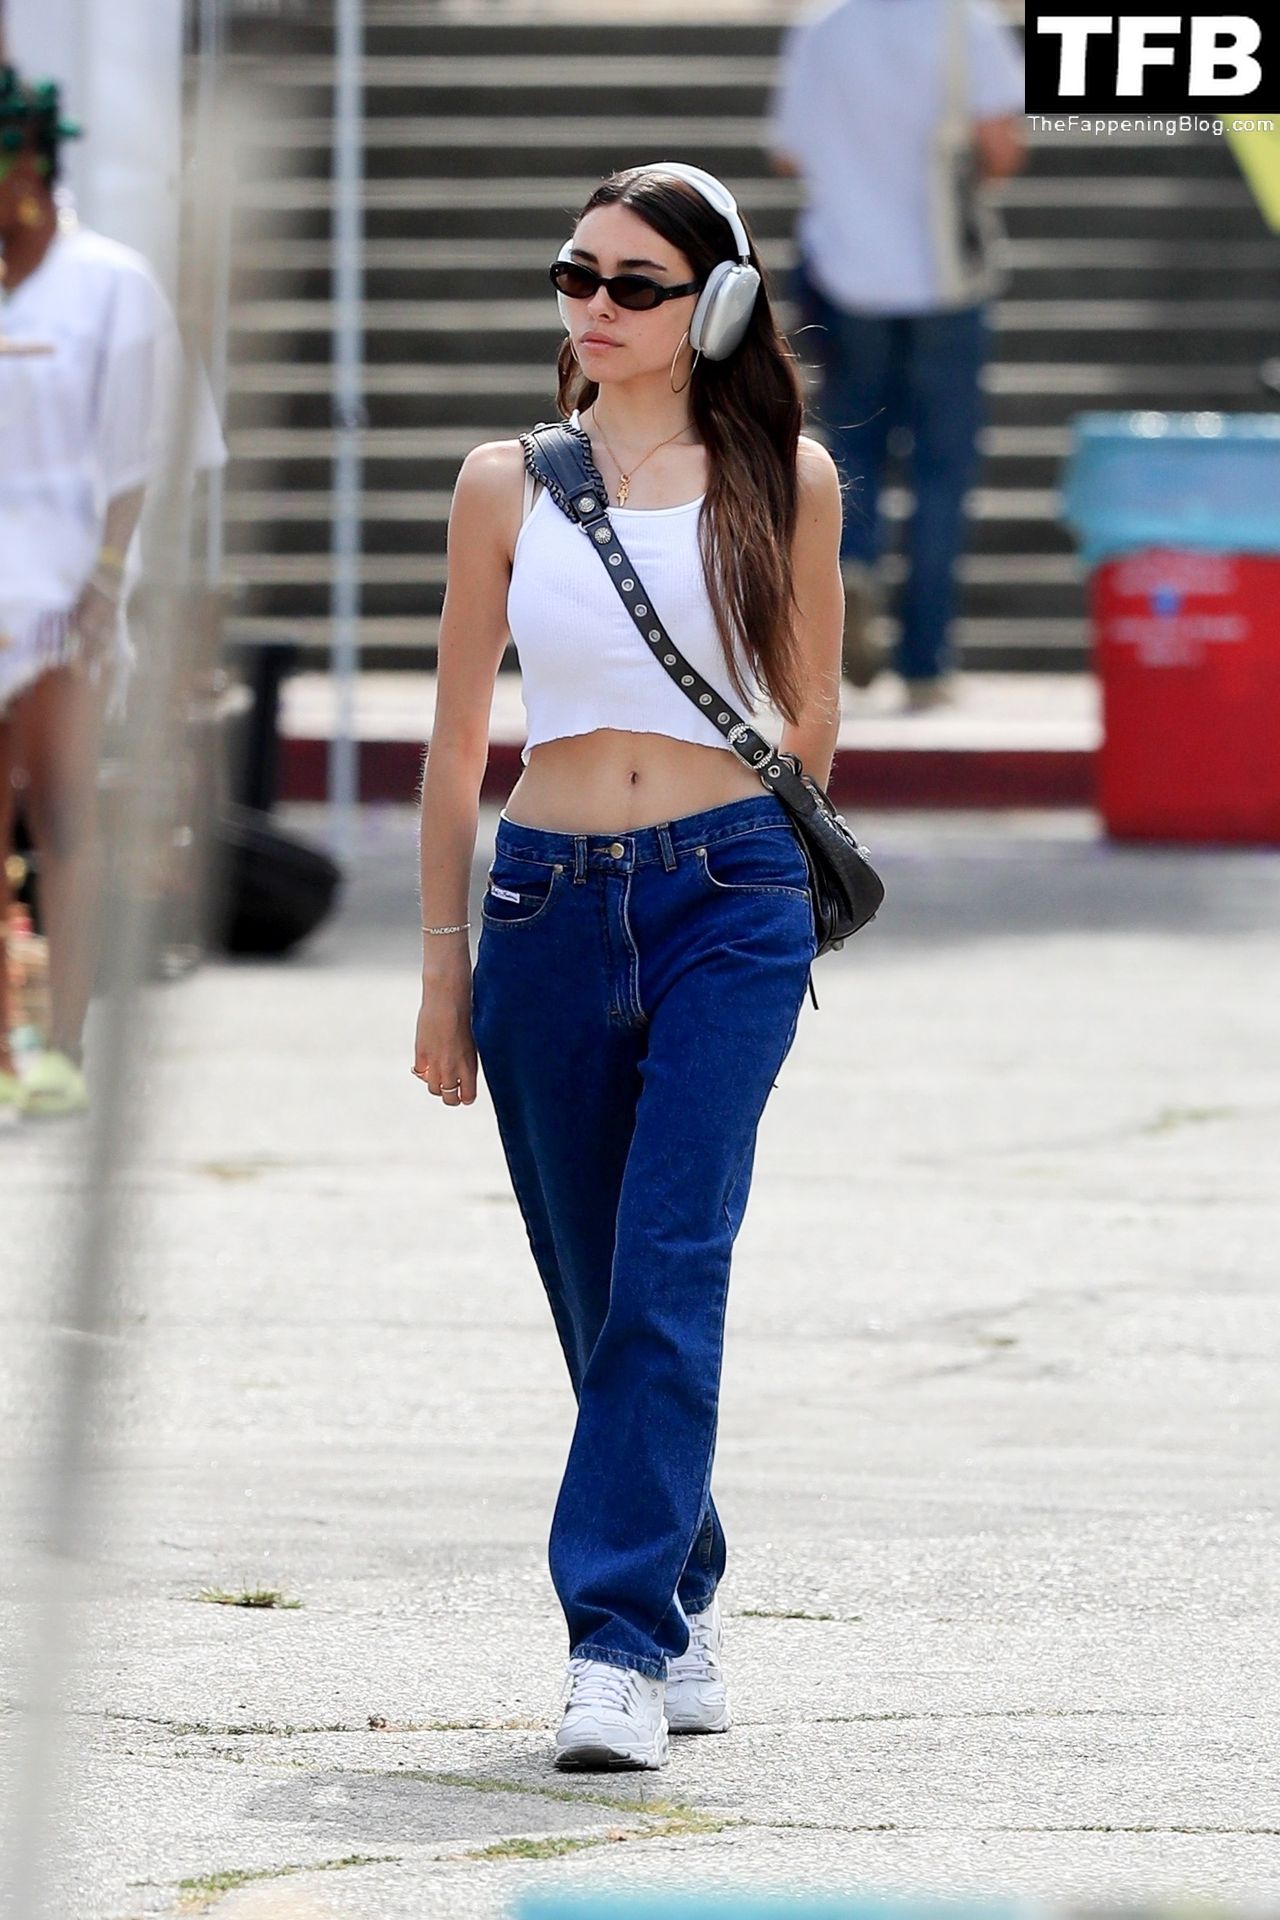 Madison-Beer-Sexy-The-Fappening-Blog-27.jpg